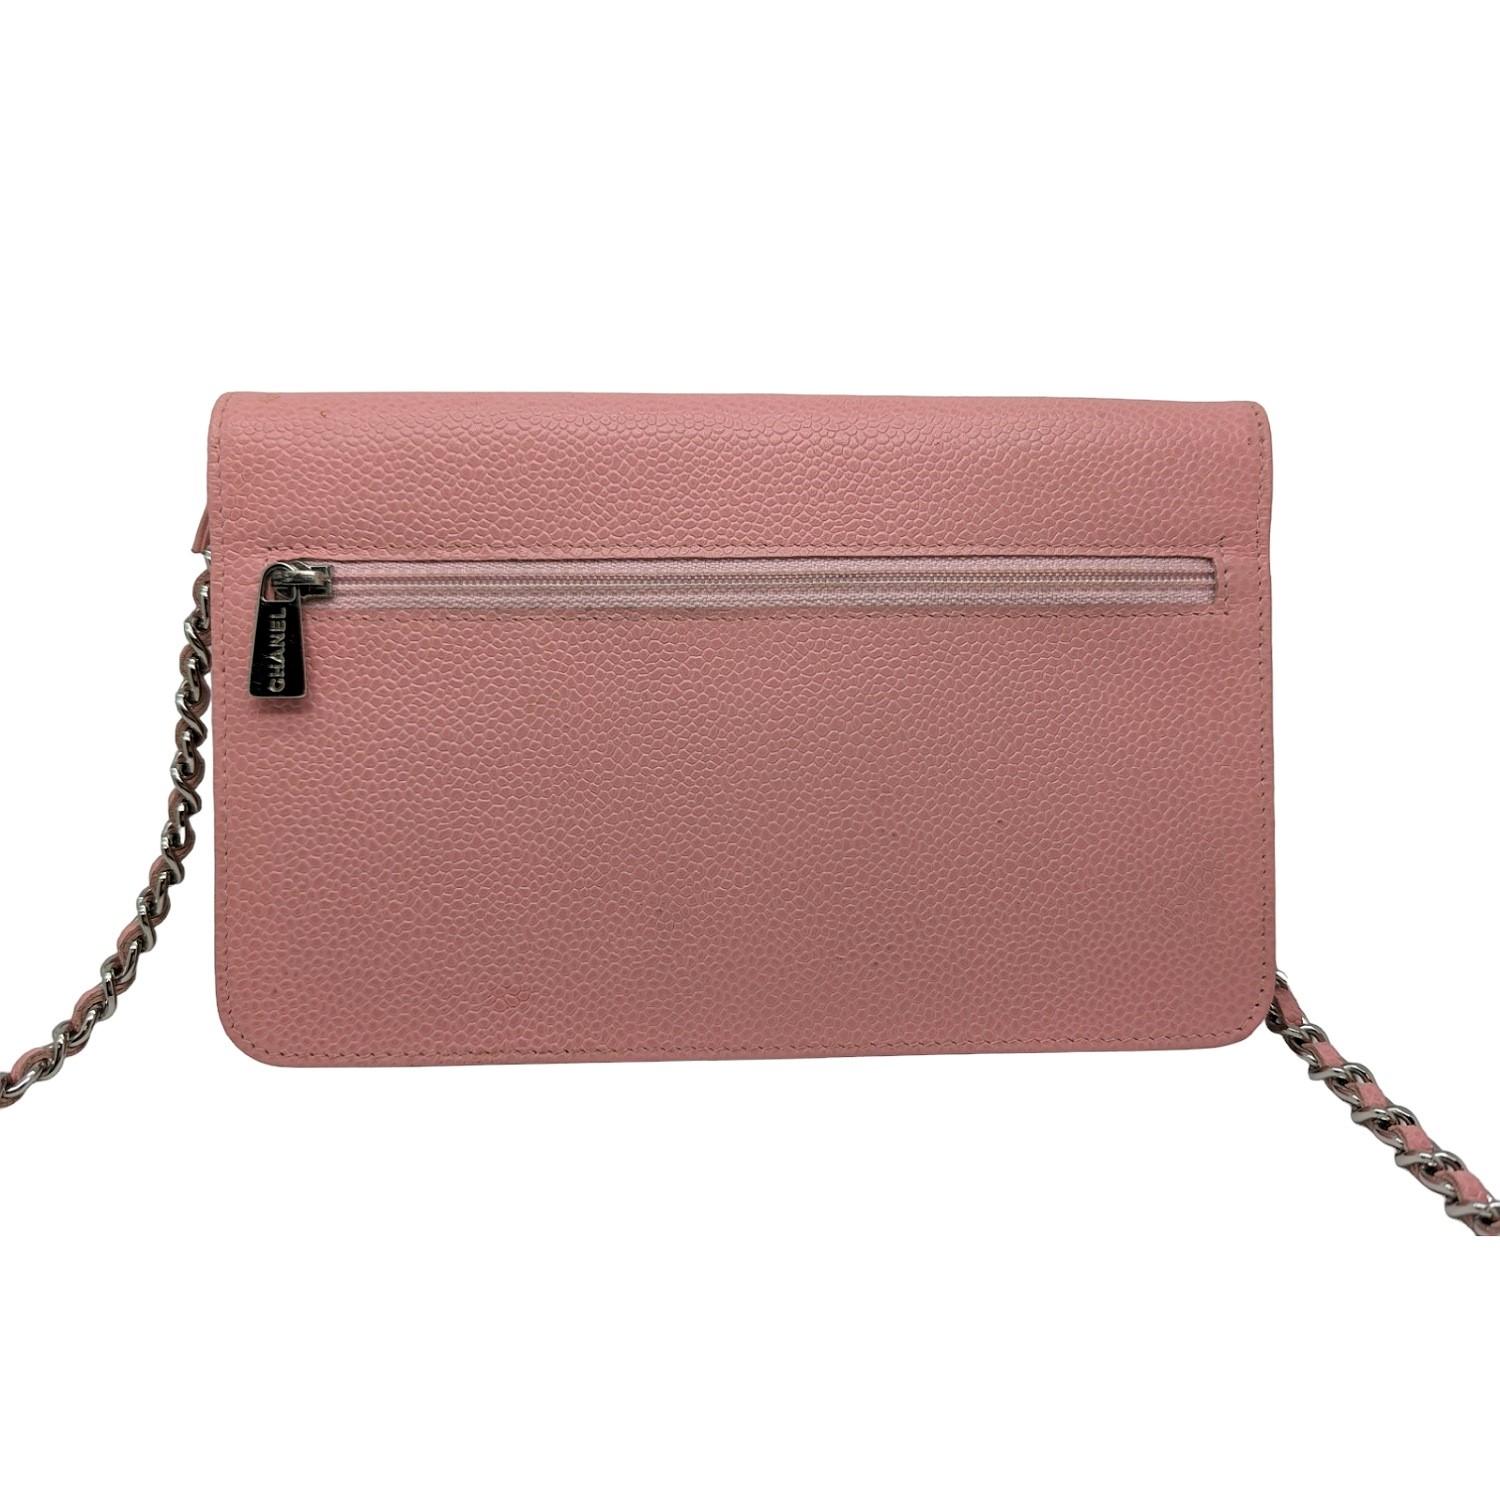 This stylish wallet is crafted of luxuriously textured caviar leather in pink, with a Chanel CC logo embossed on the front. The bag features a leather threaded silver chain-link shoulder strap and a crossover flap. This opens to a beige fabric and